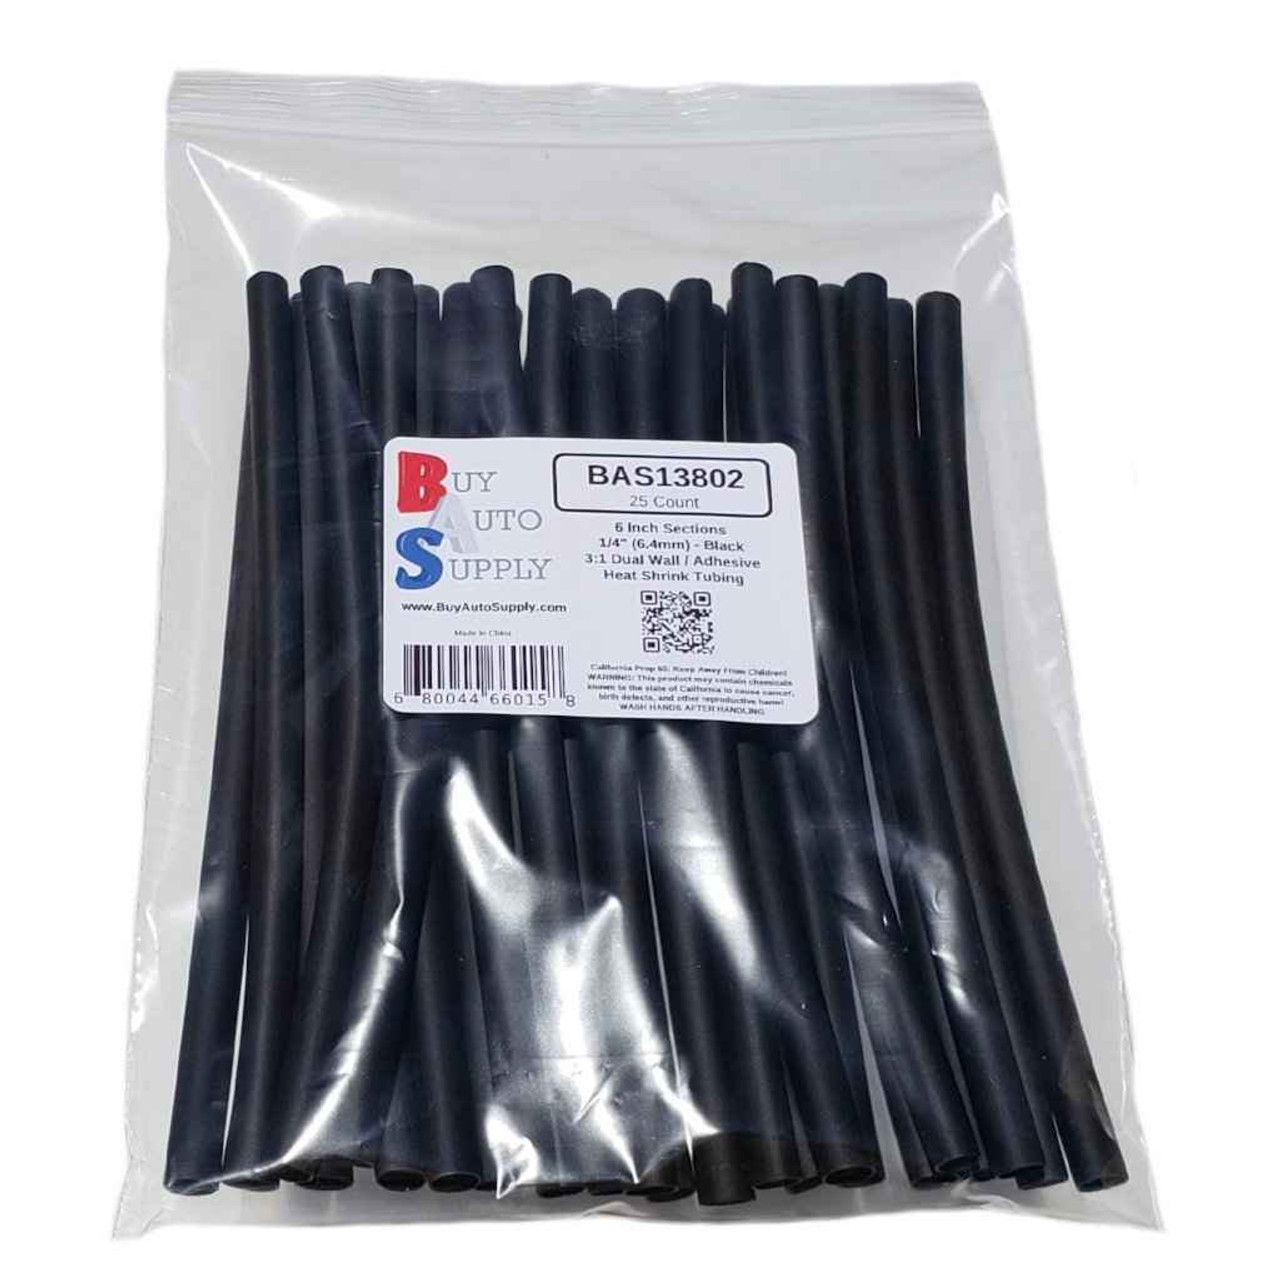 TA23210 Double Wall Adhesive Heat Shrink Tubes Assortment - Wise